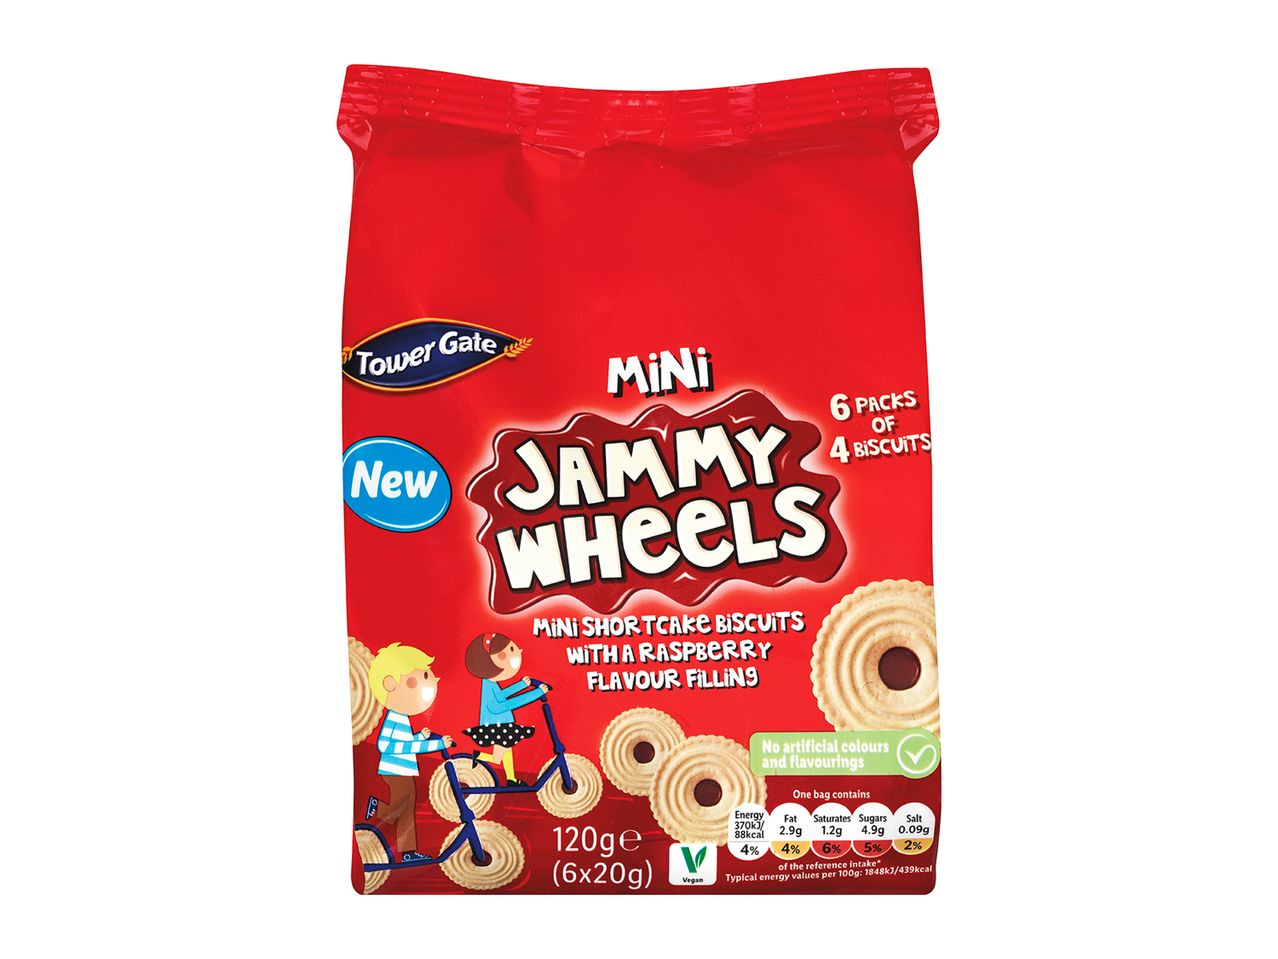 Go to full screen view: Tower Gate Mini Jammy Wheels - Image 1